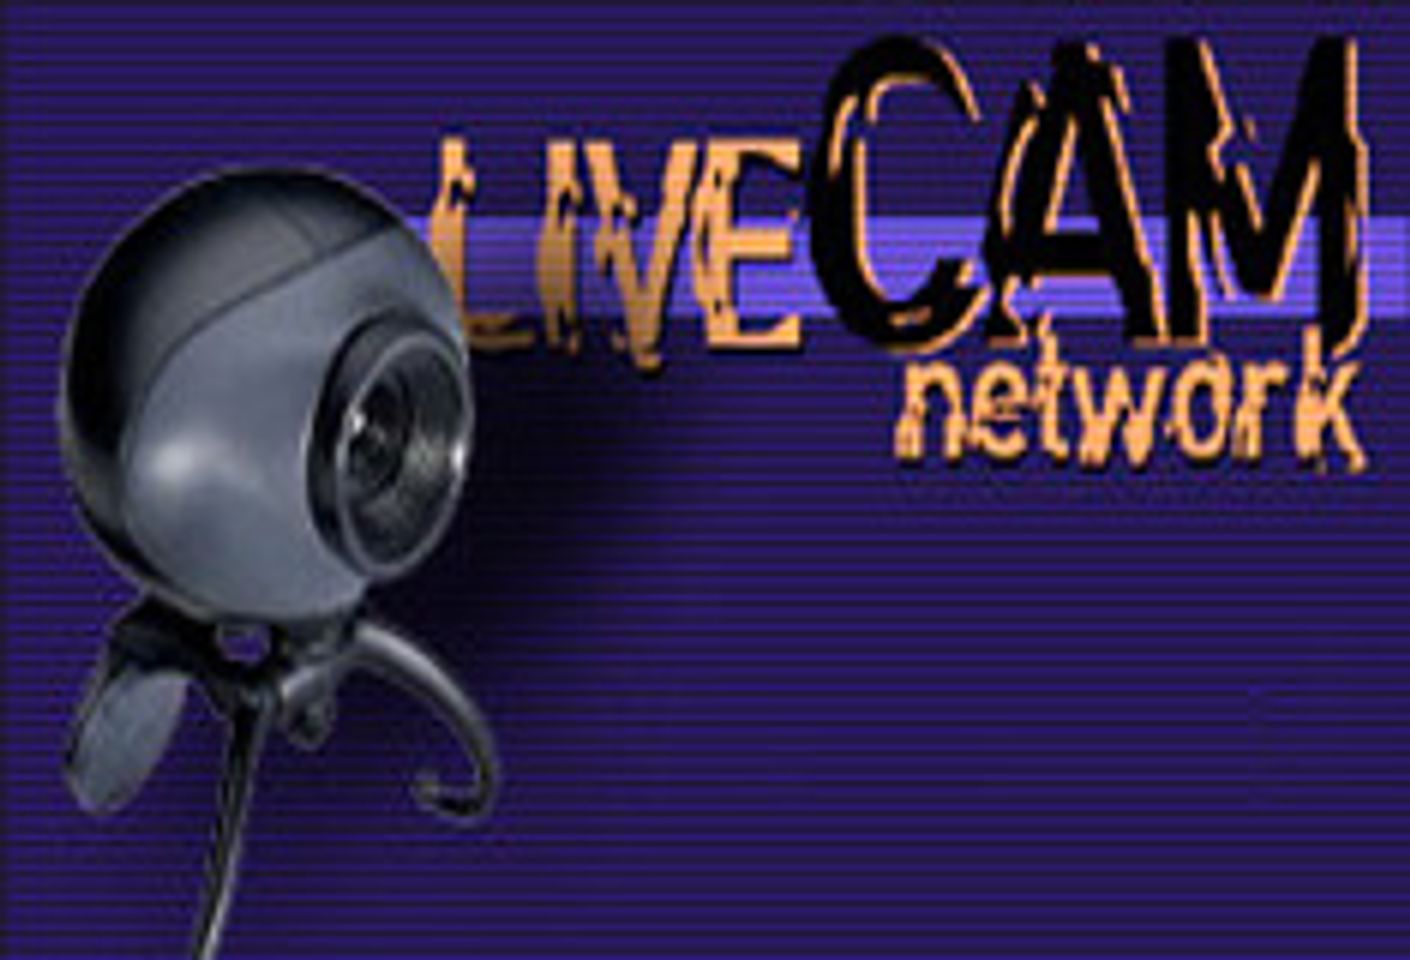 LiveCamNetwork Finds Success with Live High Definition Video